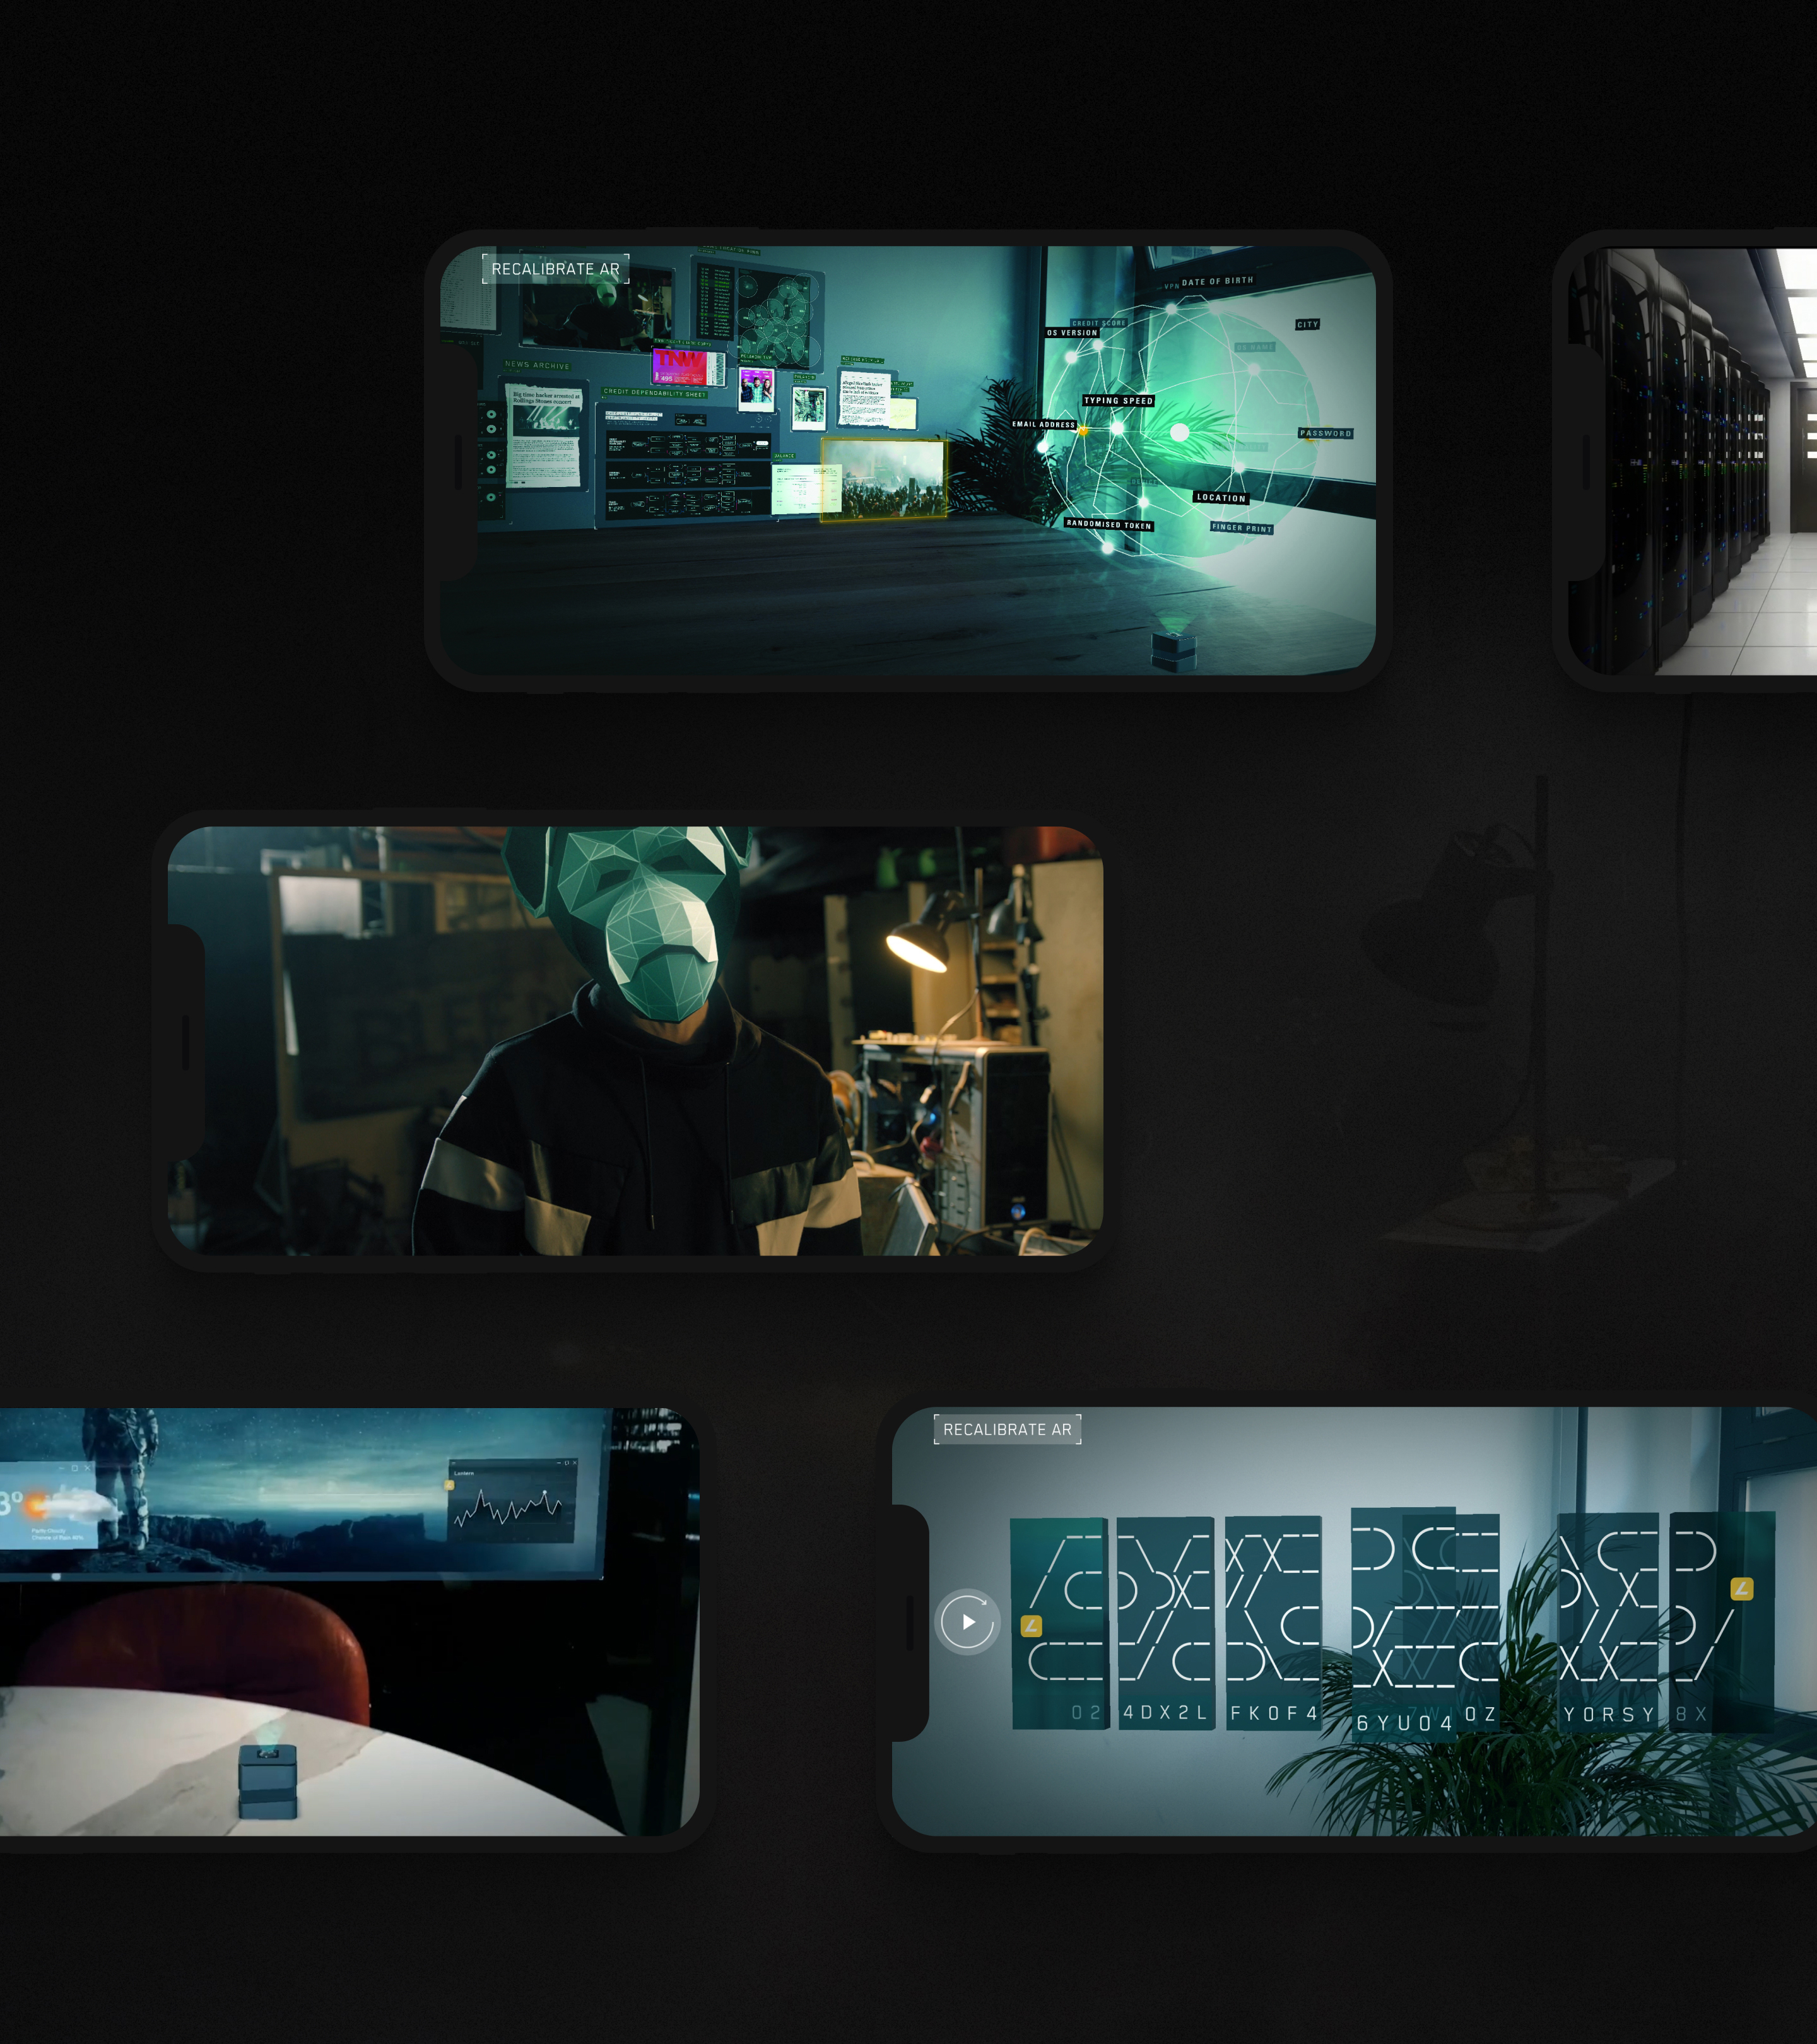 Various mobile views of the ABN AMRO Lockdown game, such as an example of the AR elements in a living space and a person wearing an ape mask